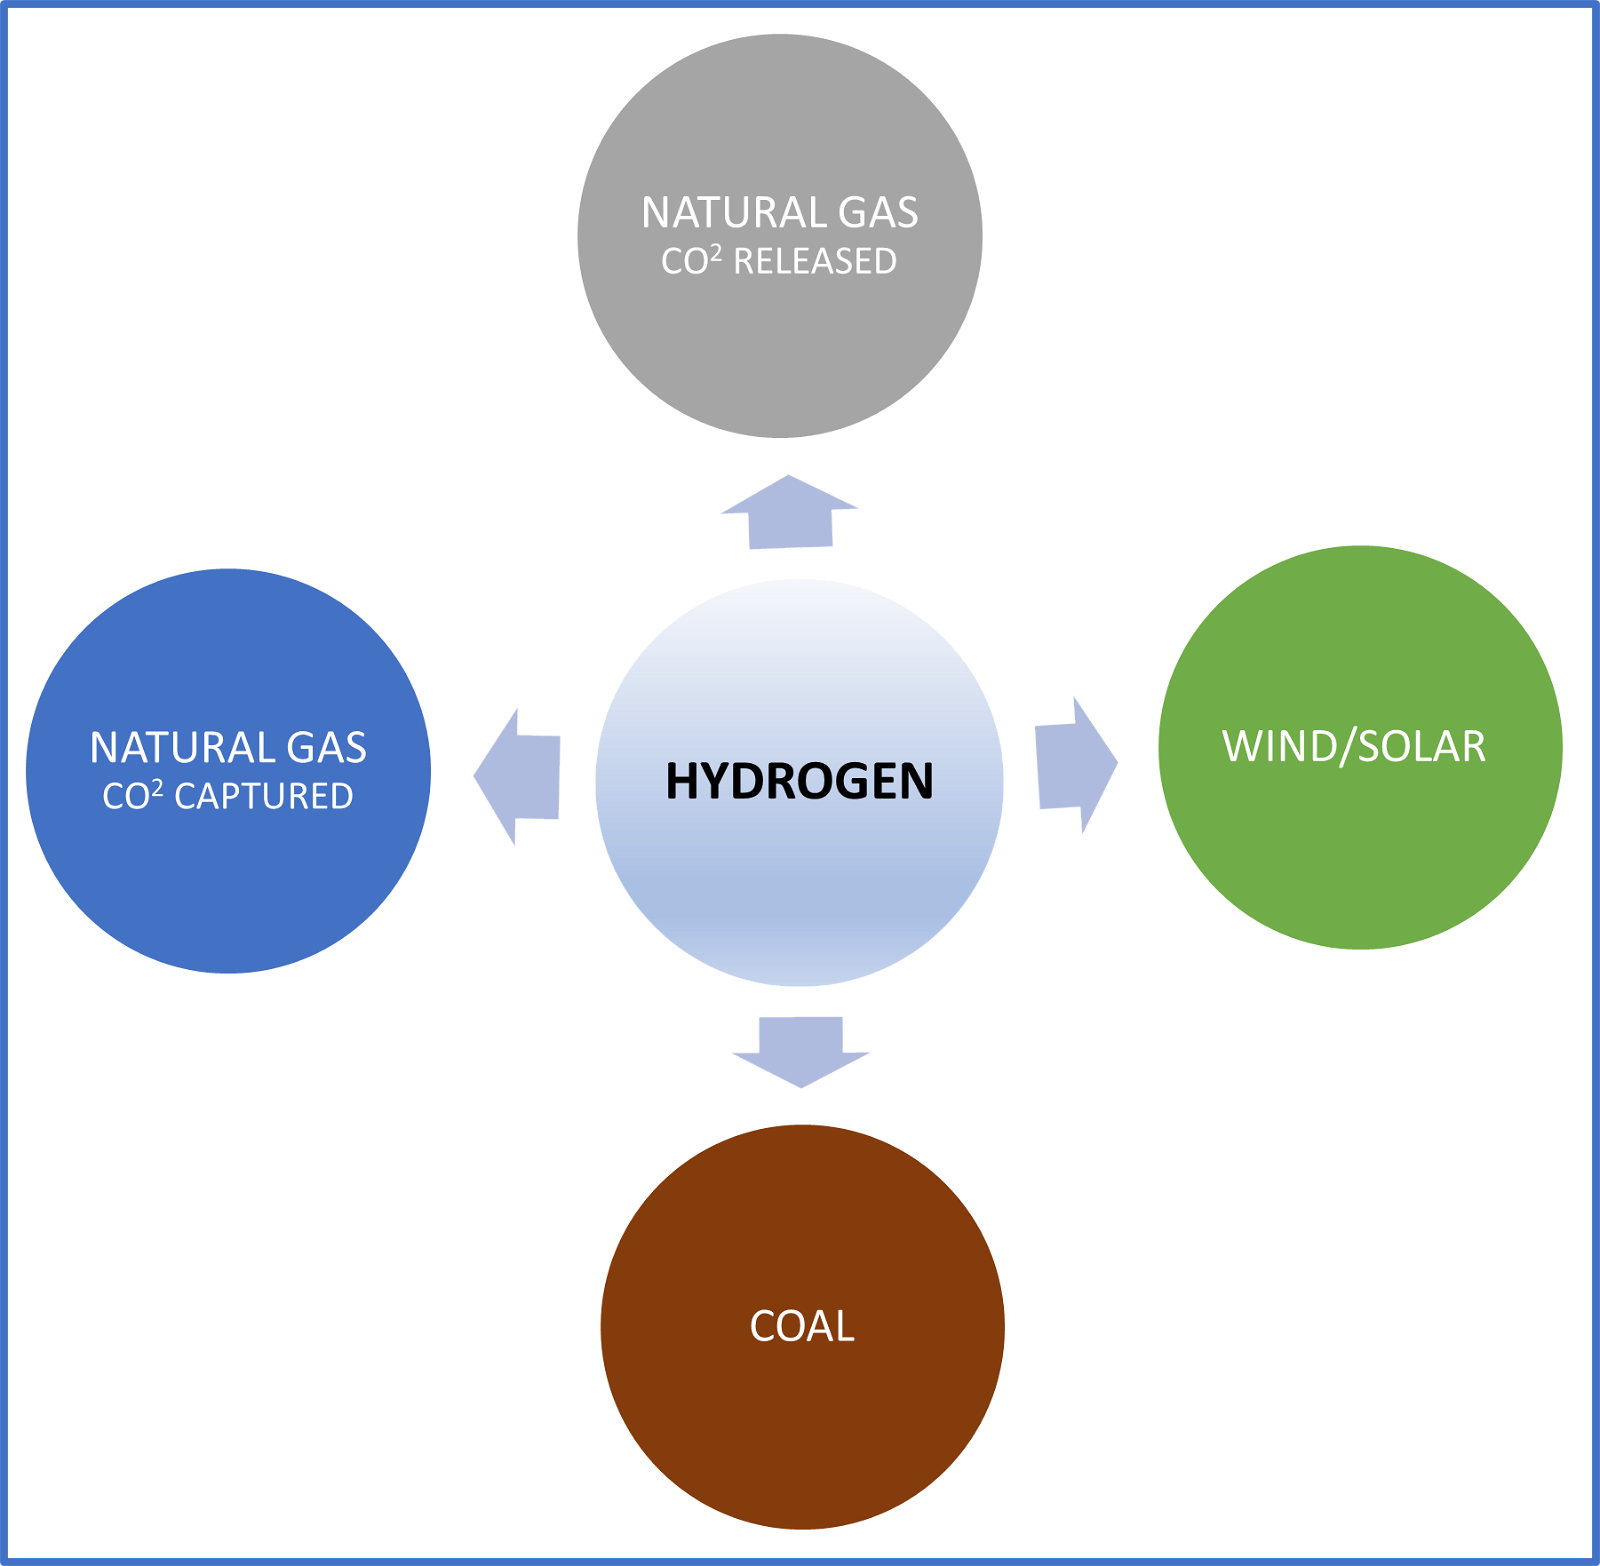 Figure 1: types of hydrogen based on the technology used to produce each